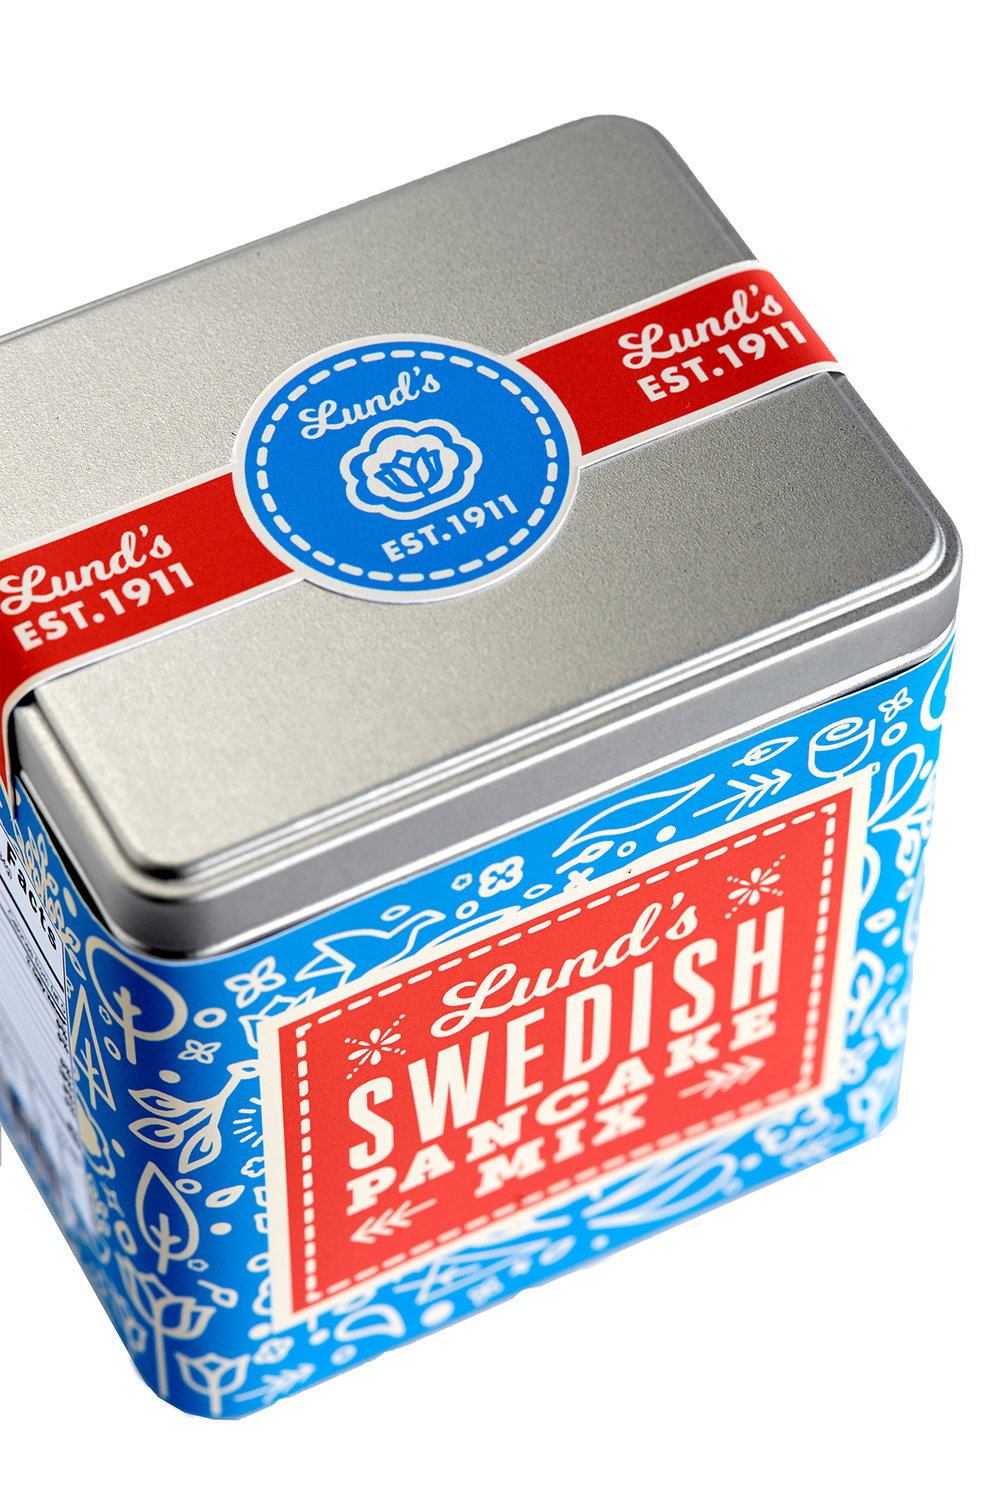 Feel a Little More Swedish With Lund's Swedish Pancake Mix | Dieline ...